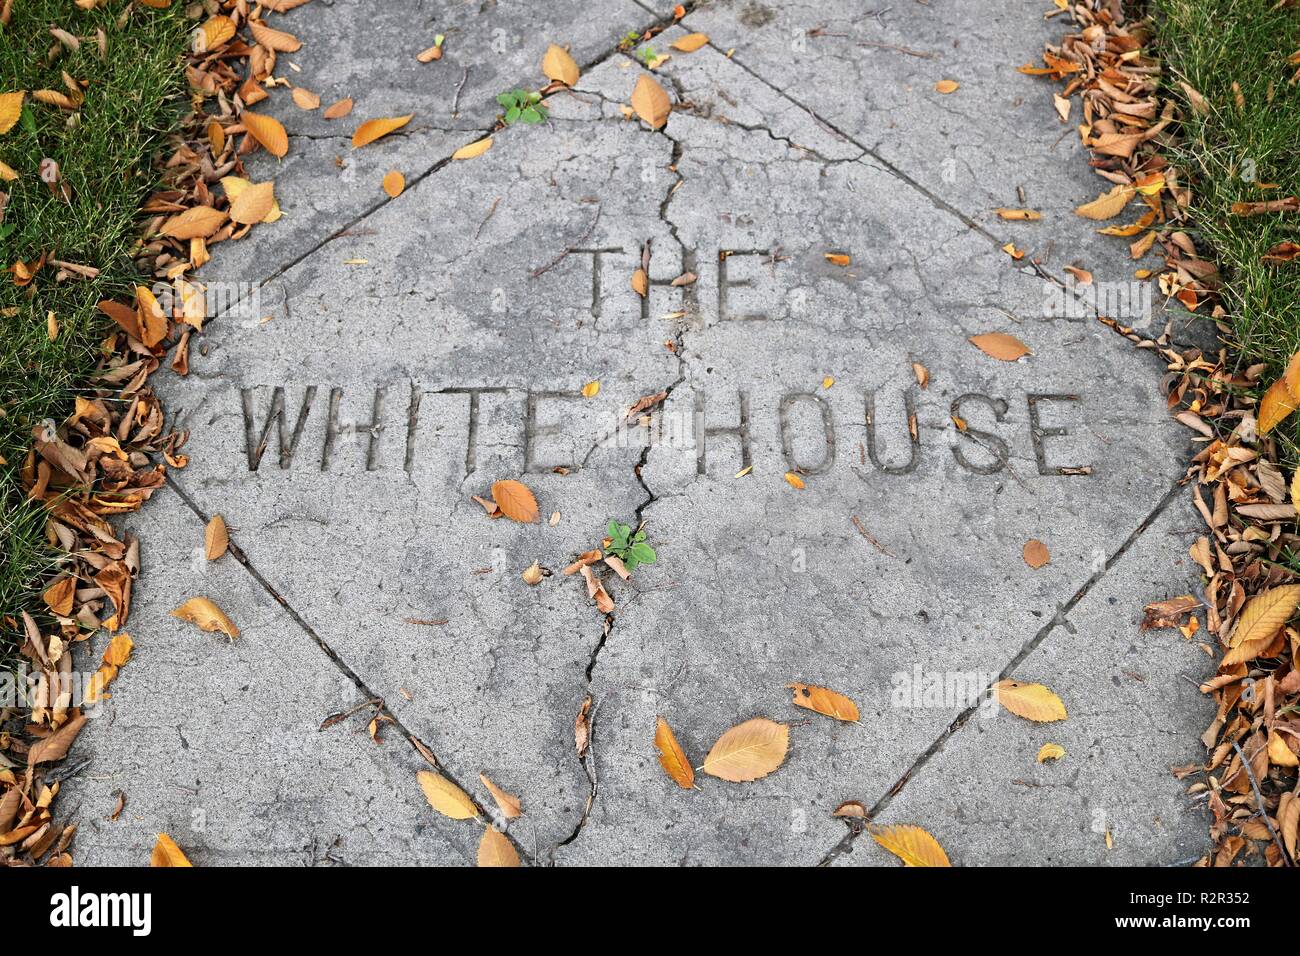 A sidewalk adorning 'the white house' with a crack going down the middle. Stock Photo